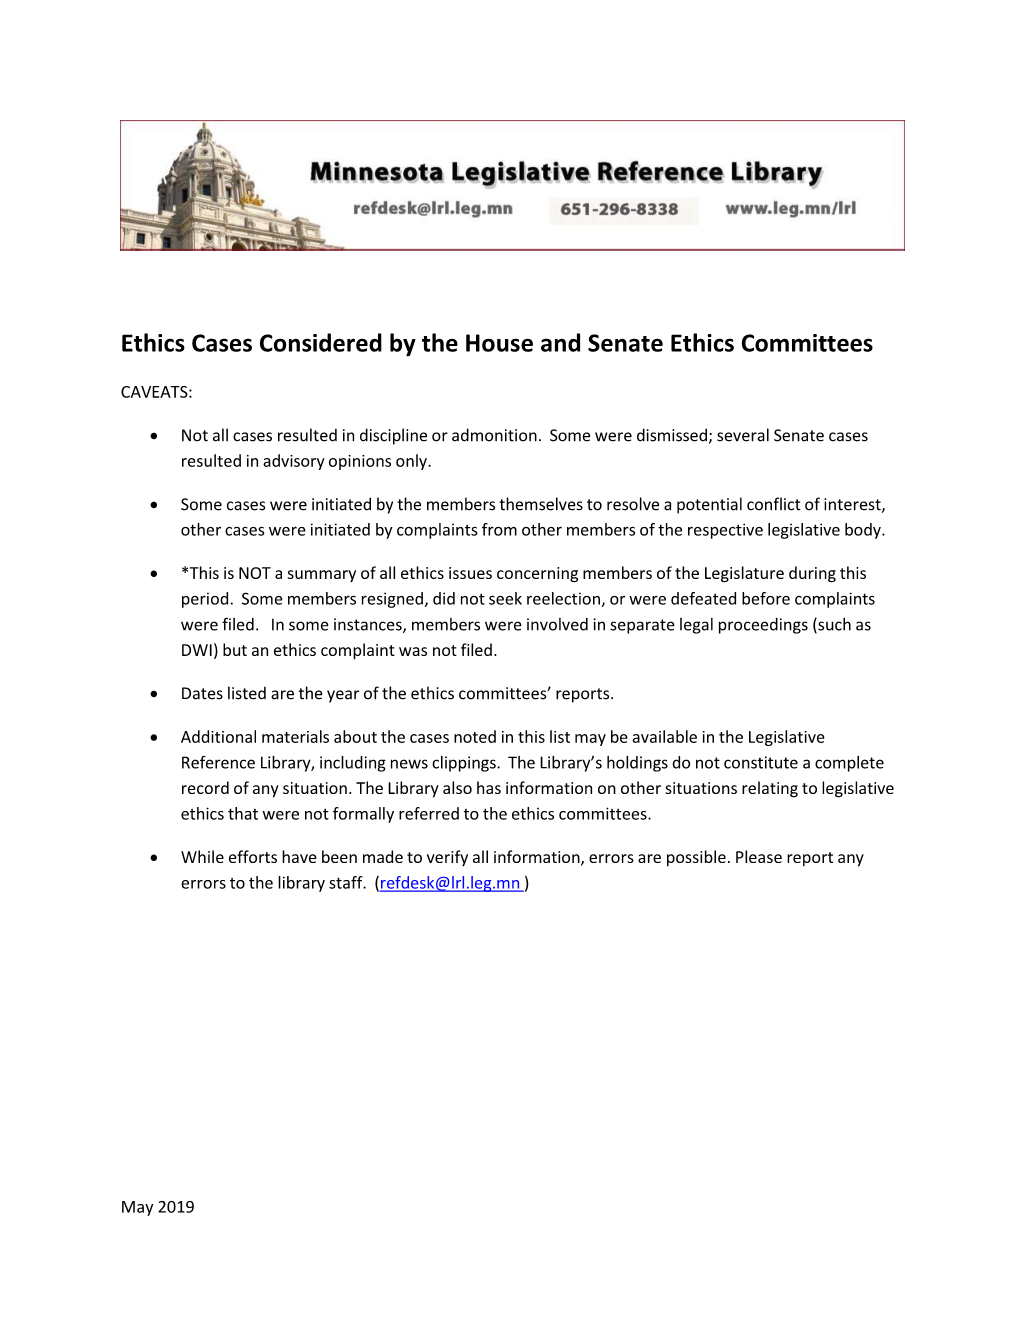 Ethics Cases Considered by the House and Senate Ethics Committees